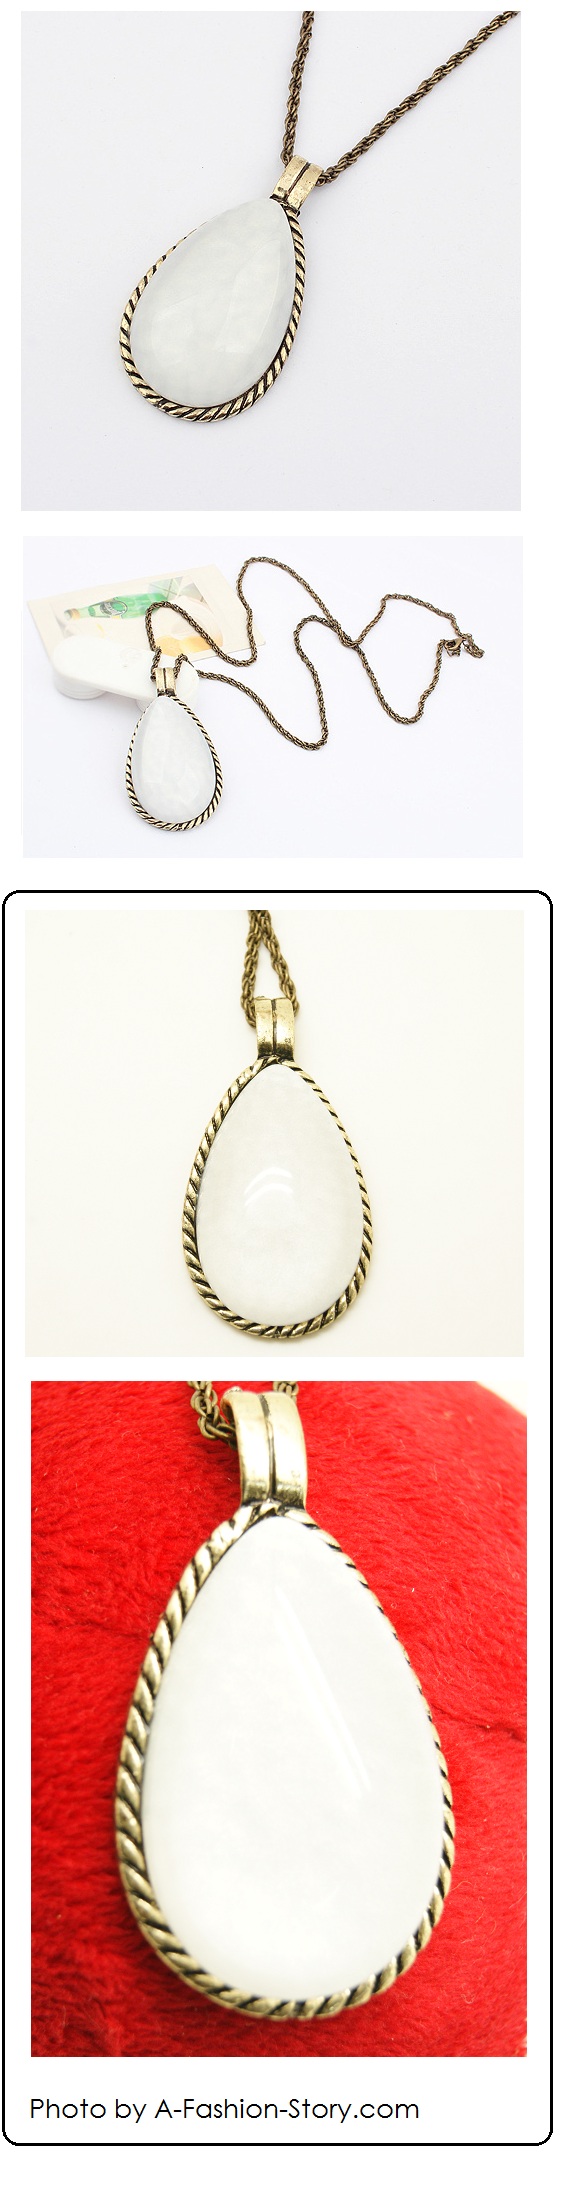 P92713 Vintage white bead long necklace malaysia accessories